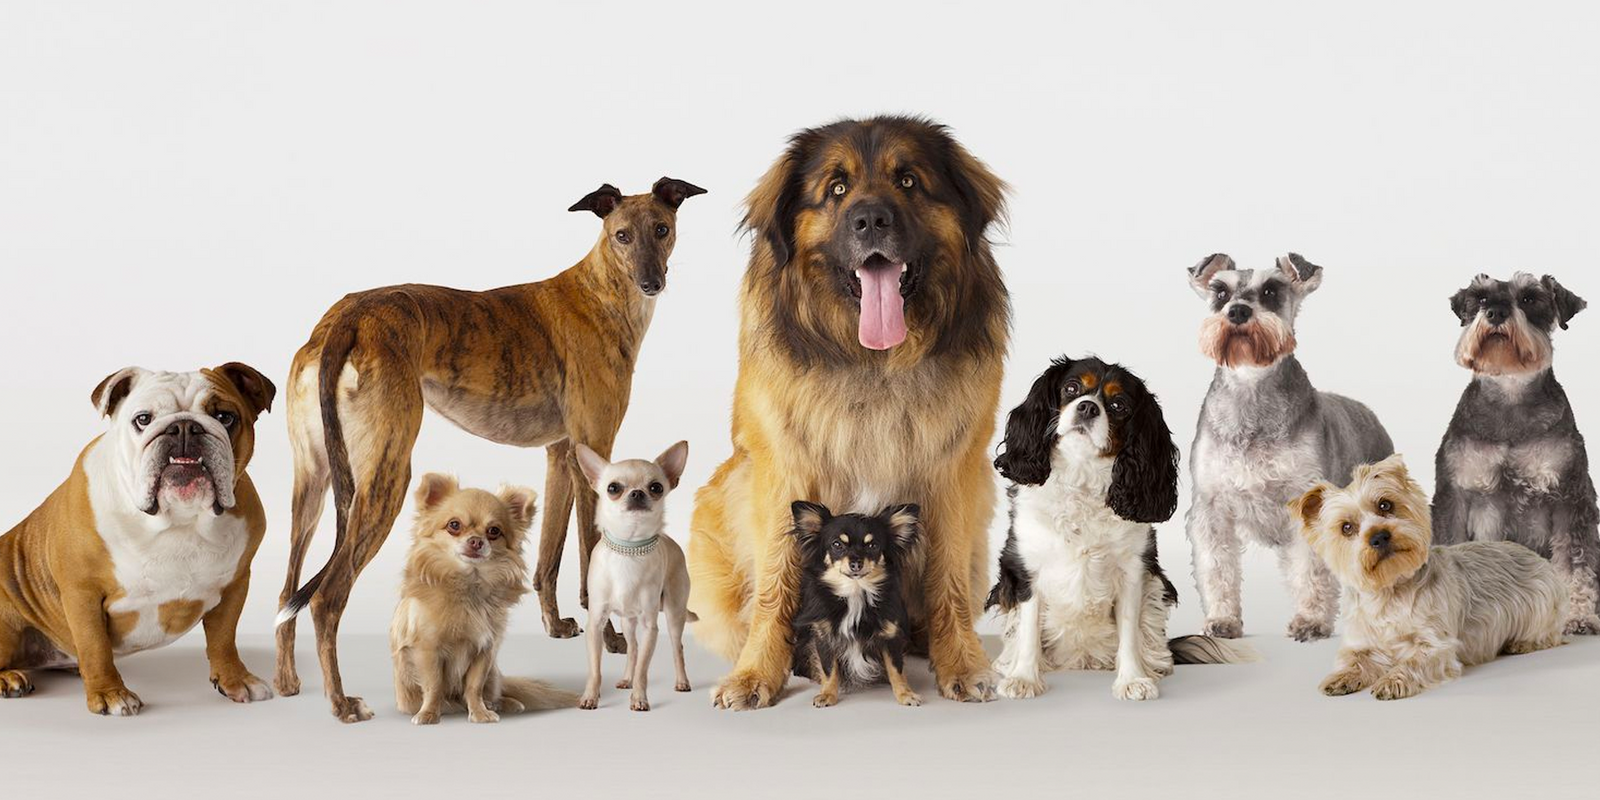 "A captivating image featuring a diverse selection of dog breeds, representing the comprehensive guide to finding the perfect dog breed for your lifestyle.